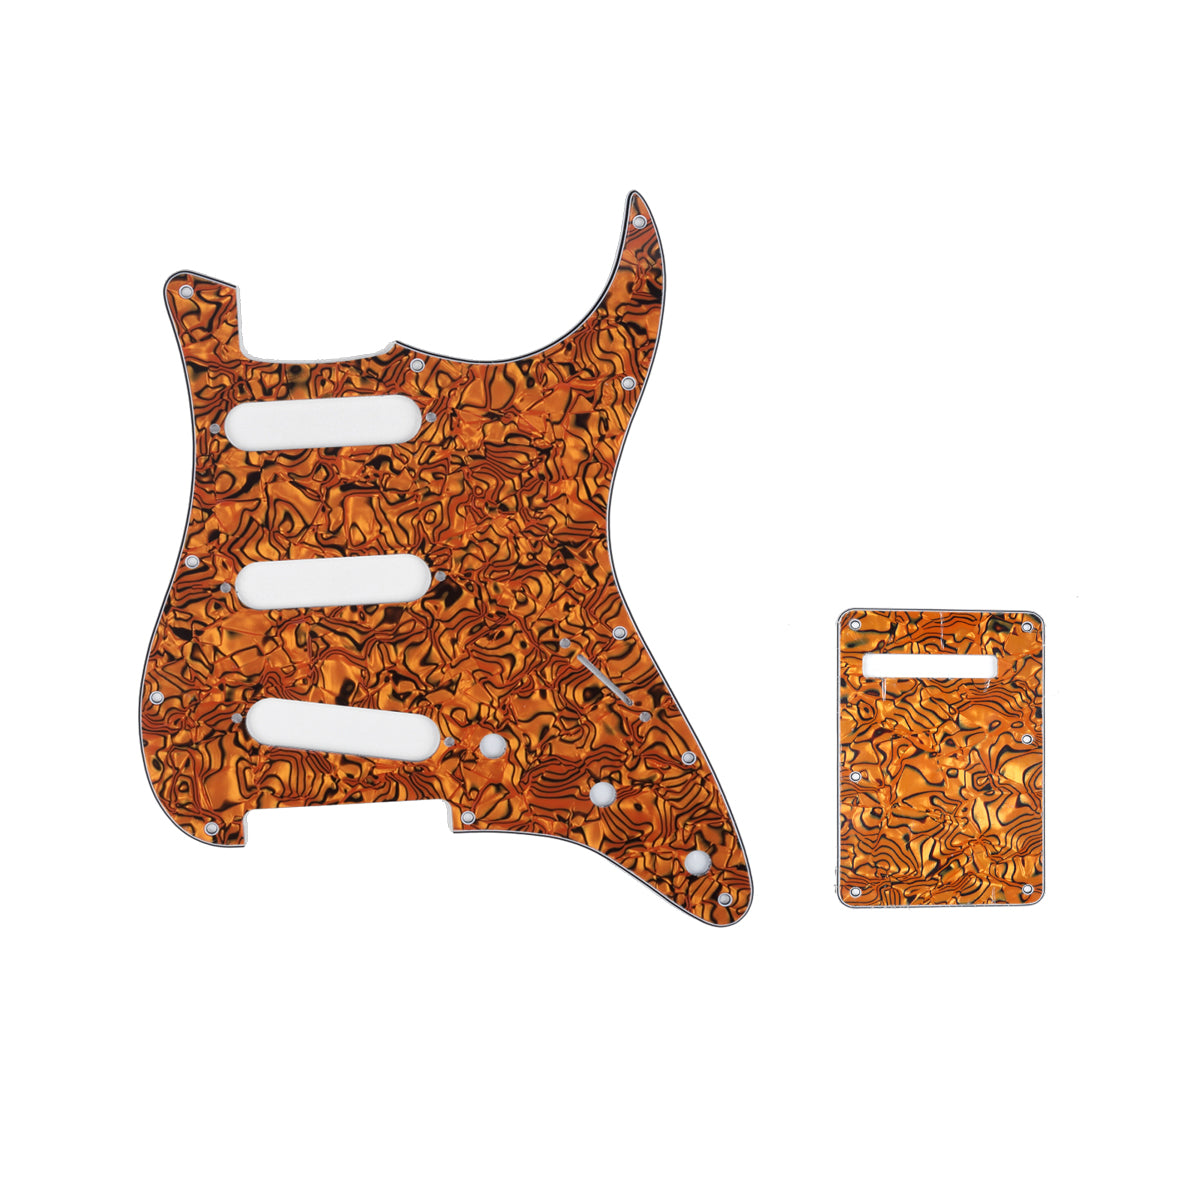 Musiclily SSS 11 Hole Strat Guitar Pickguard and BackPlate Set for Fender USA/Mexican Standard Stratocaster Modern Style, 4Ply Tiger Spot Shell